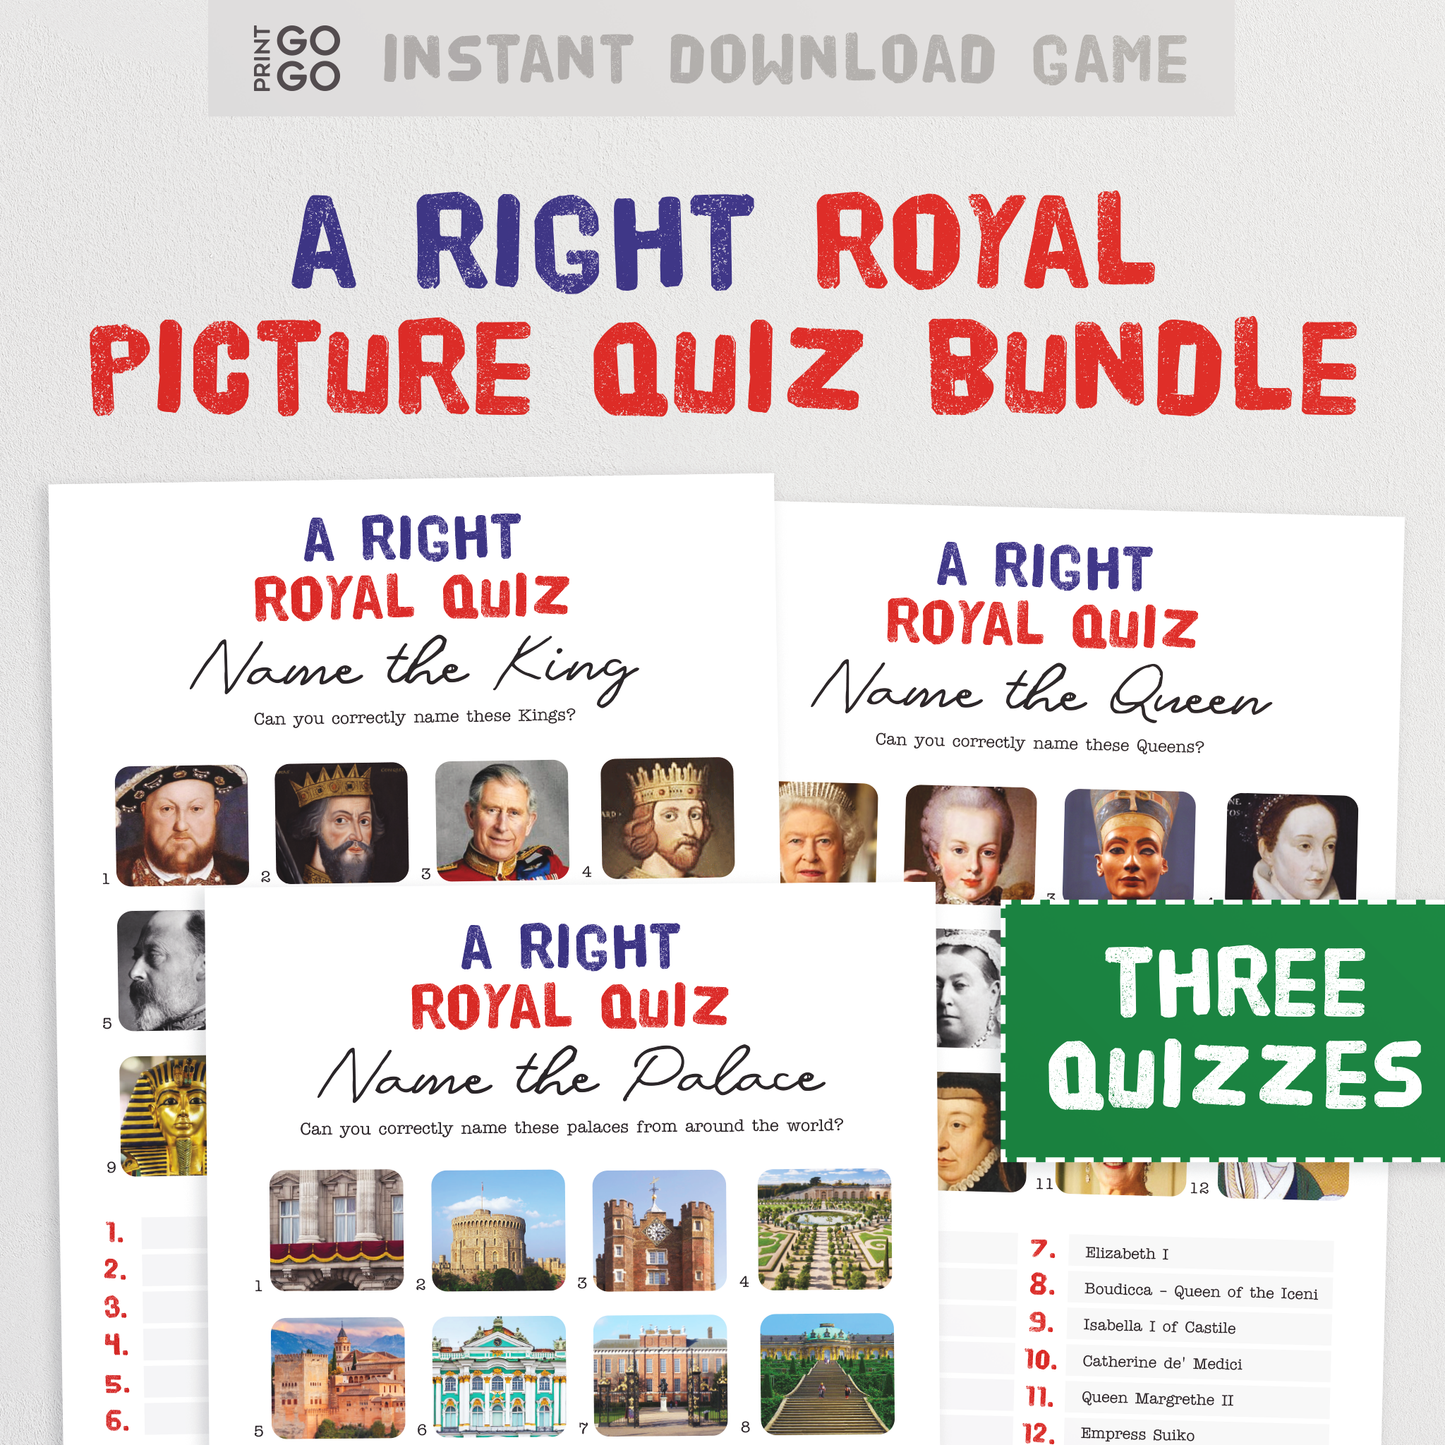 A Right Royal Quiz - 3 Fun Picture Quizzes To Test Your Royal Family Knowledge